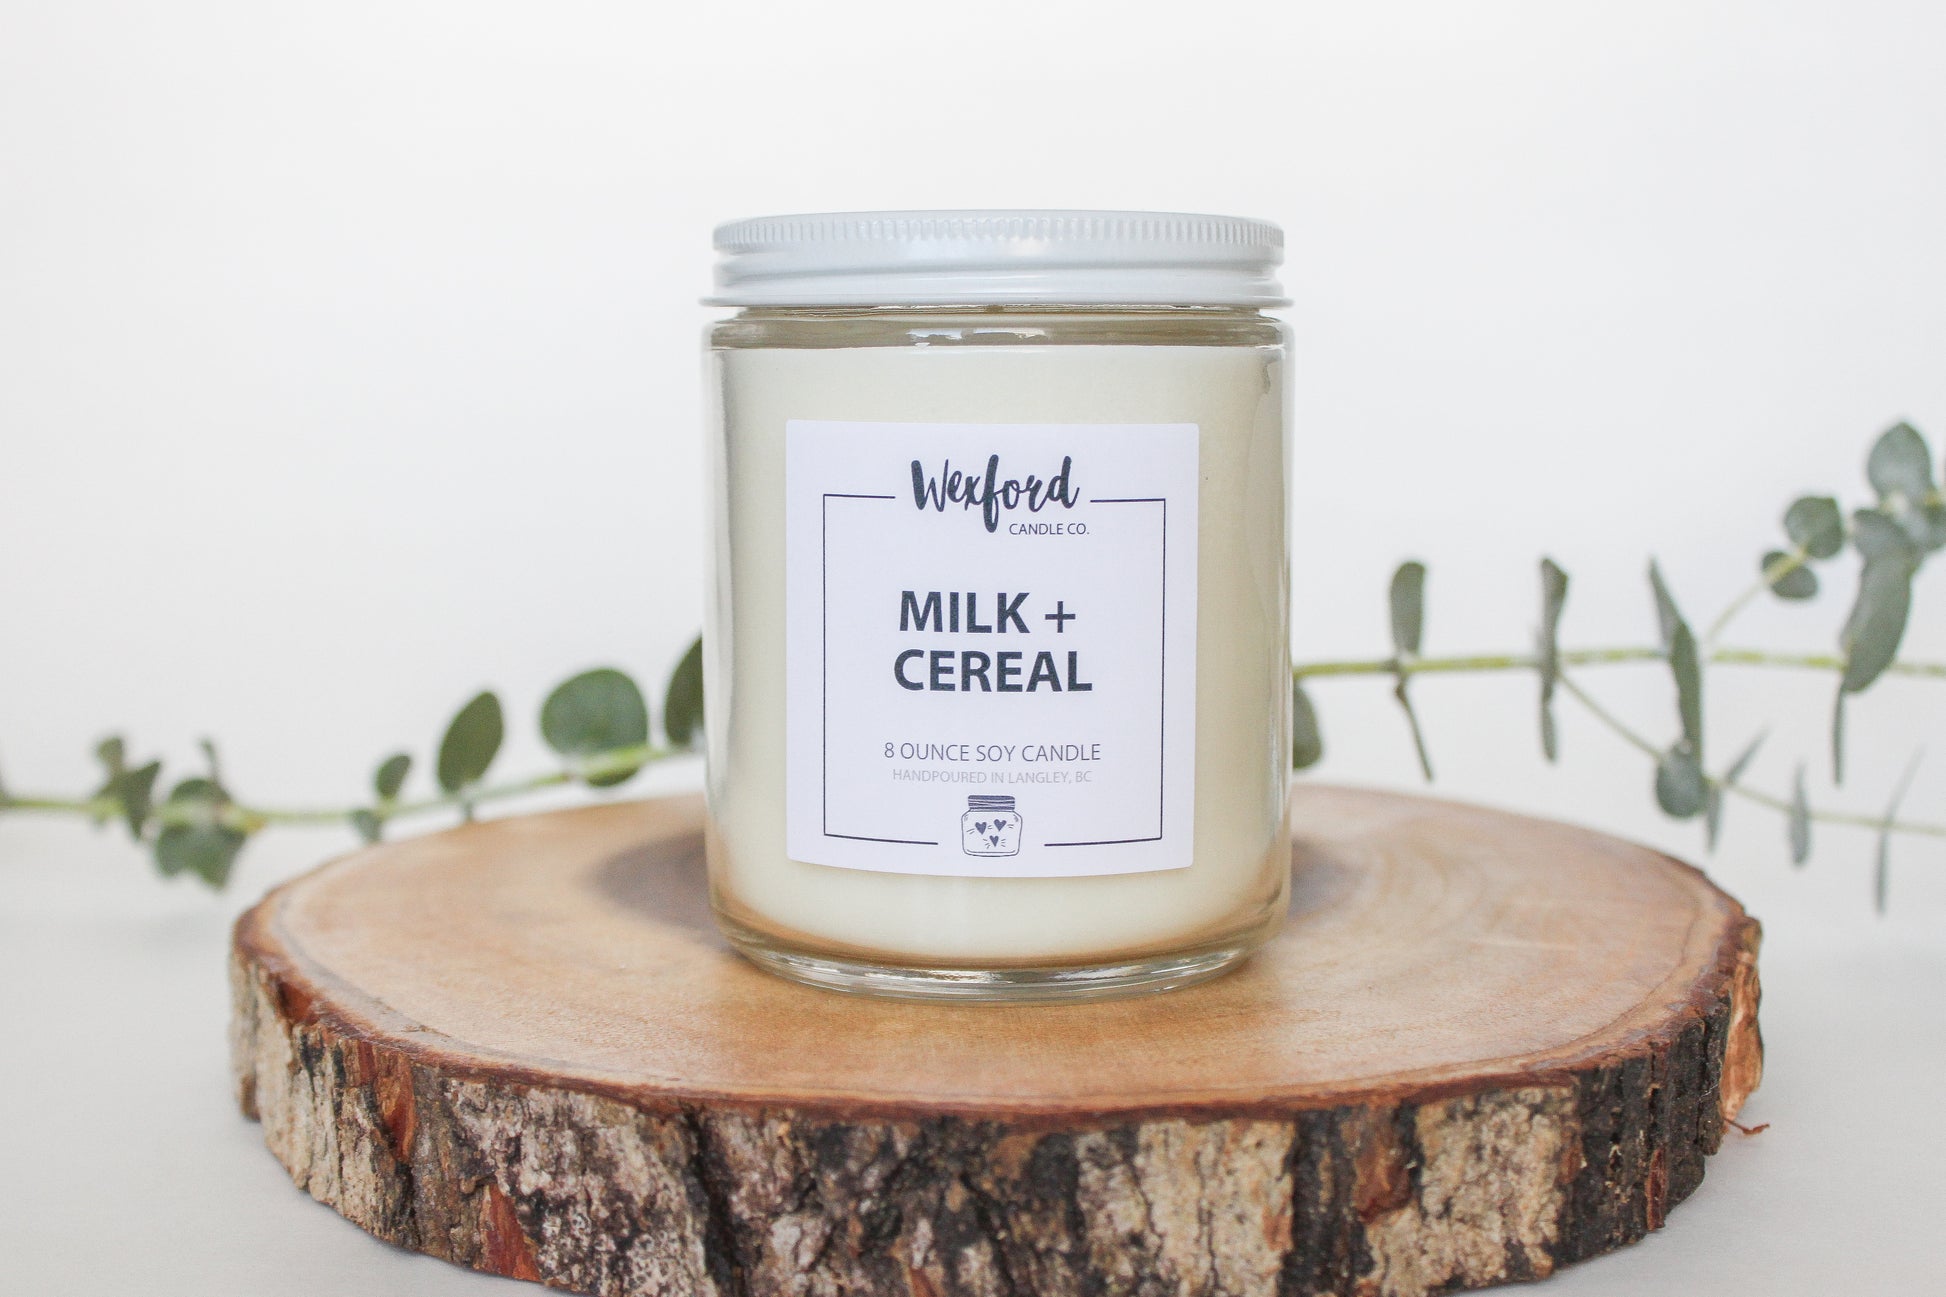 Milk + Cereal Soy Candle - Wexford Candle Co.